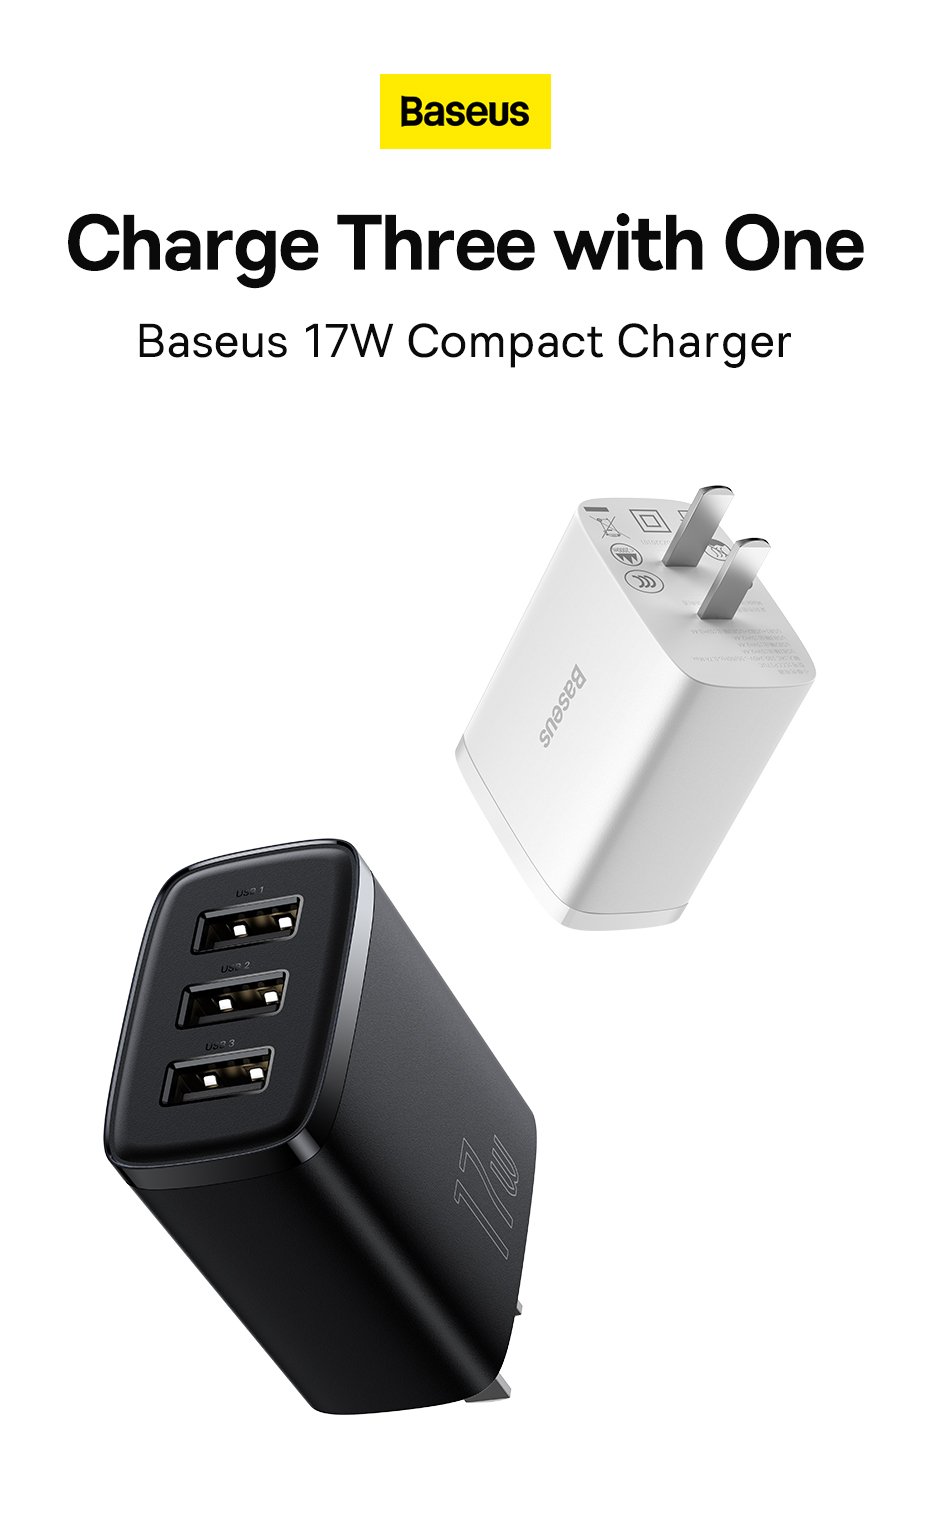 Baseus-17W-3-Port-USB-Charger-Travel-Wall-Adapter-Fast-Charging-For-iPhone-13-Pro-Max-For-Samsung-Ga-1942841-1